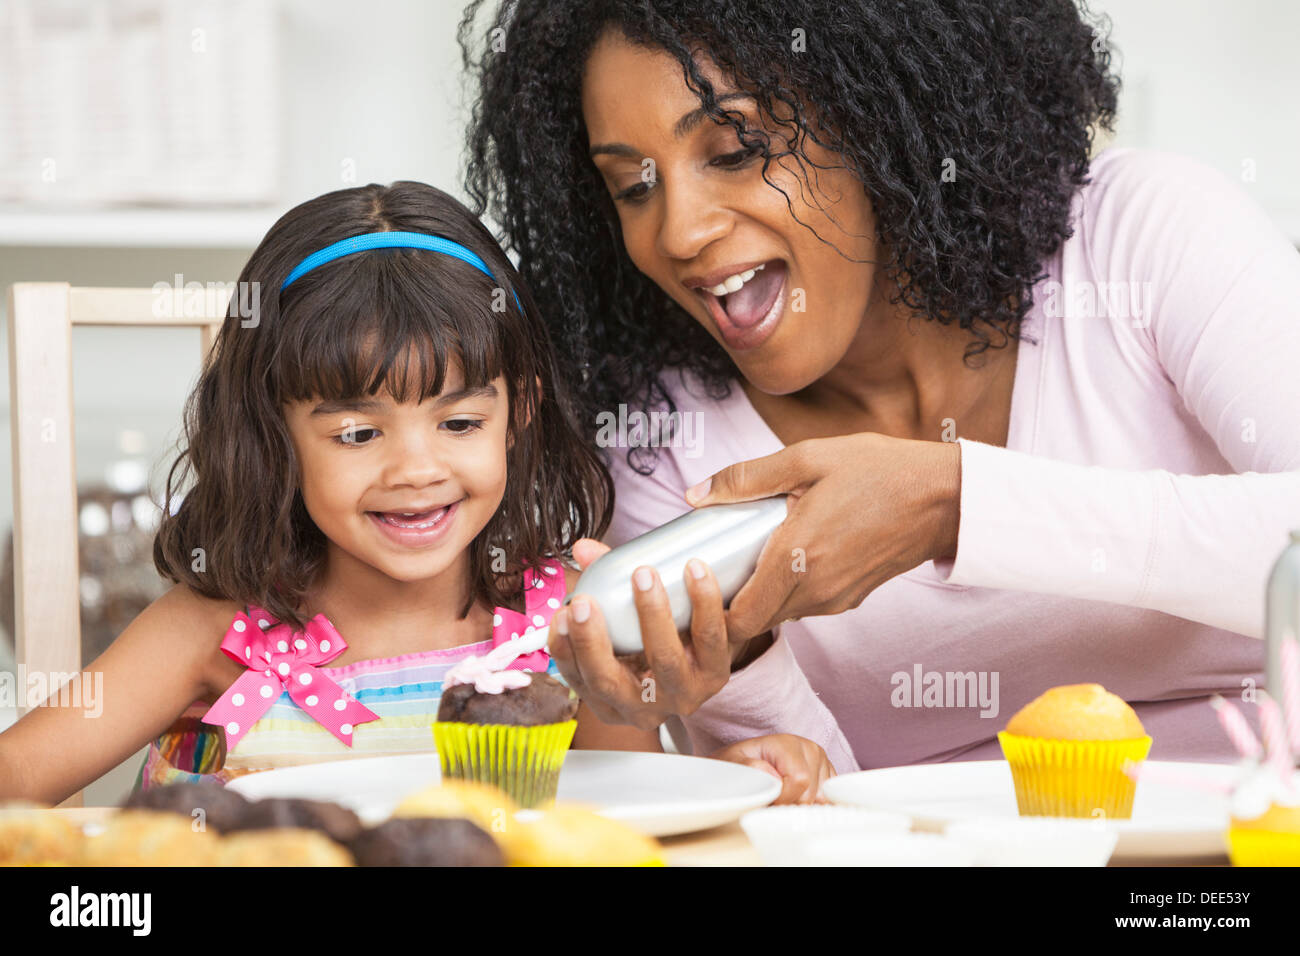 African American mother and young daughter having fun cup cakes glaçage glaçage Banque D'Images